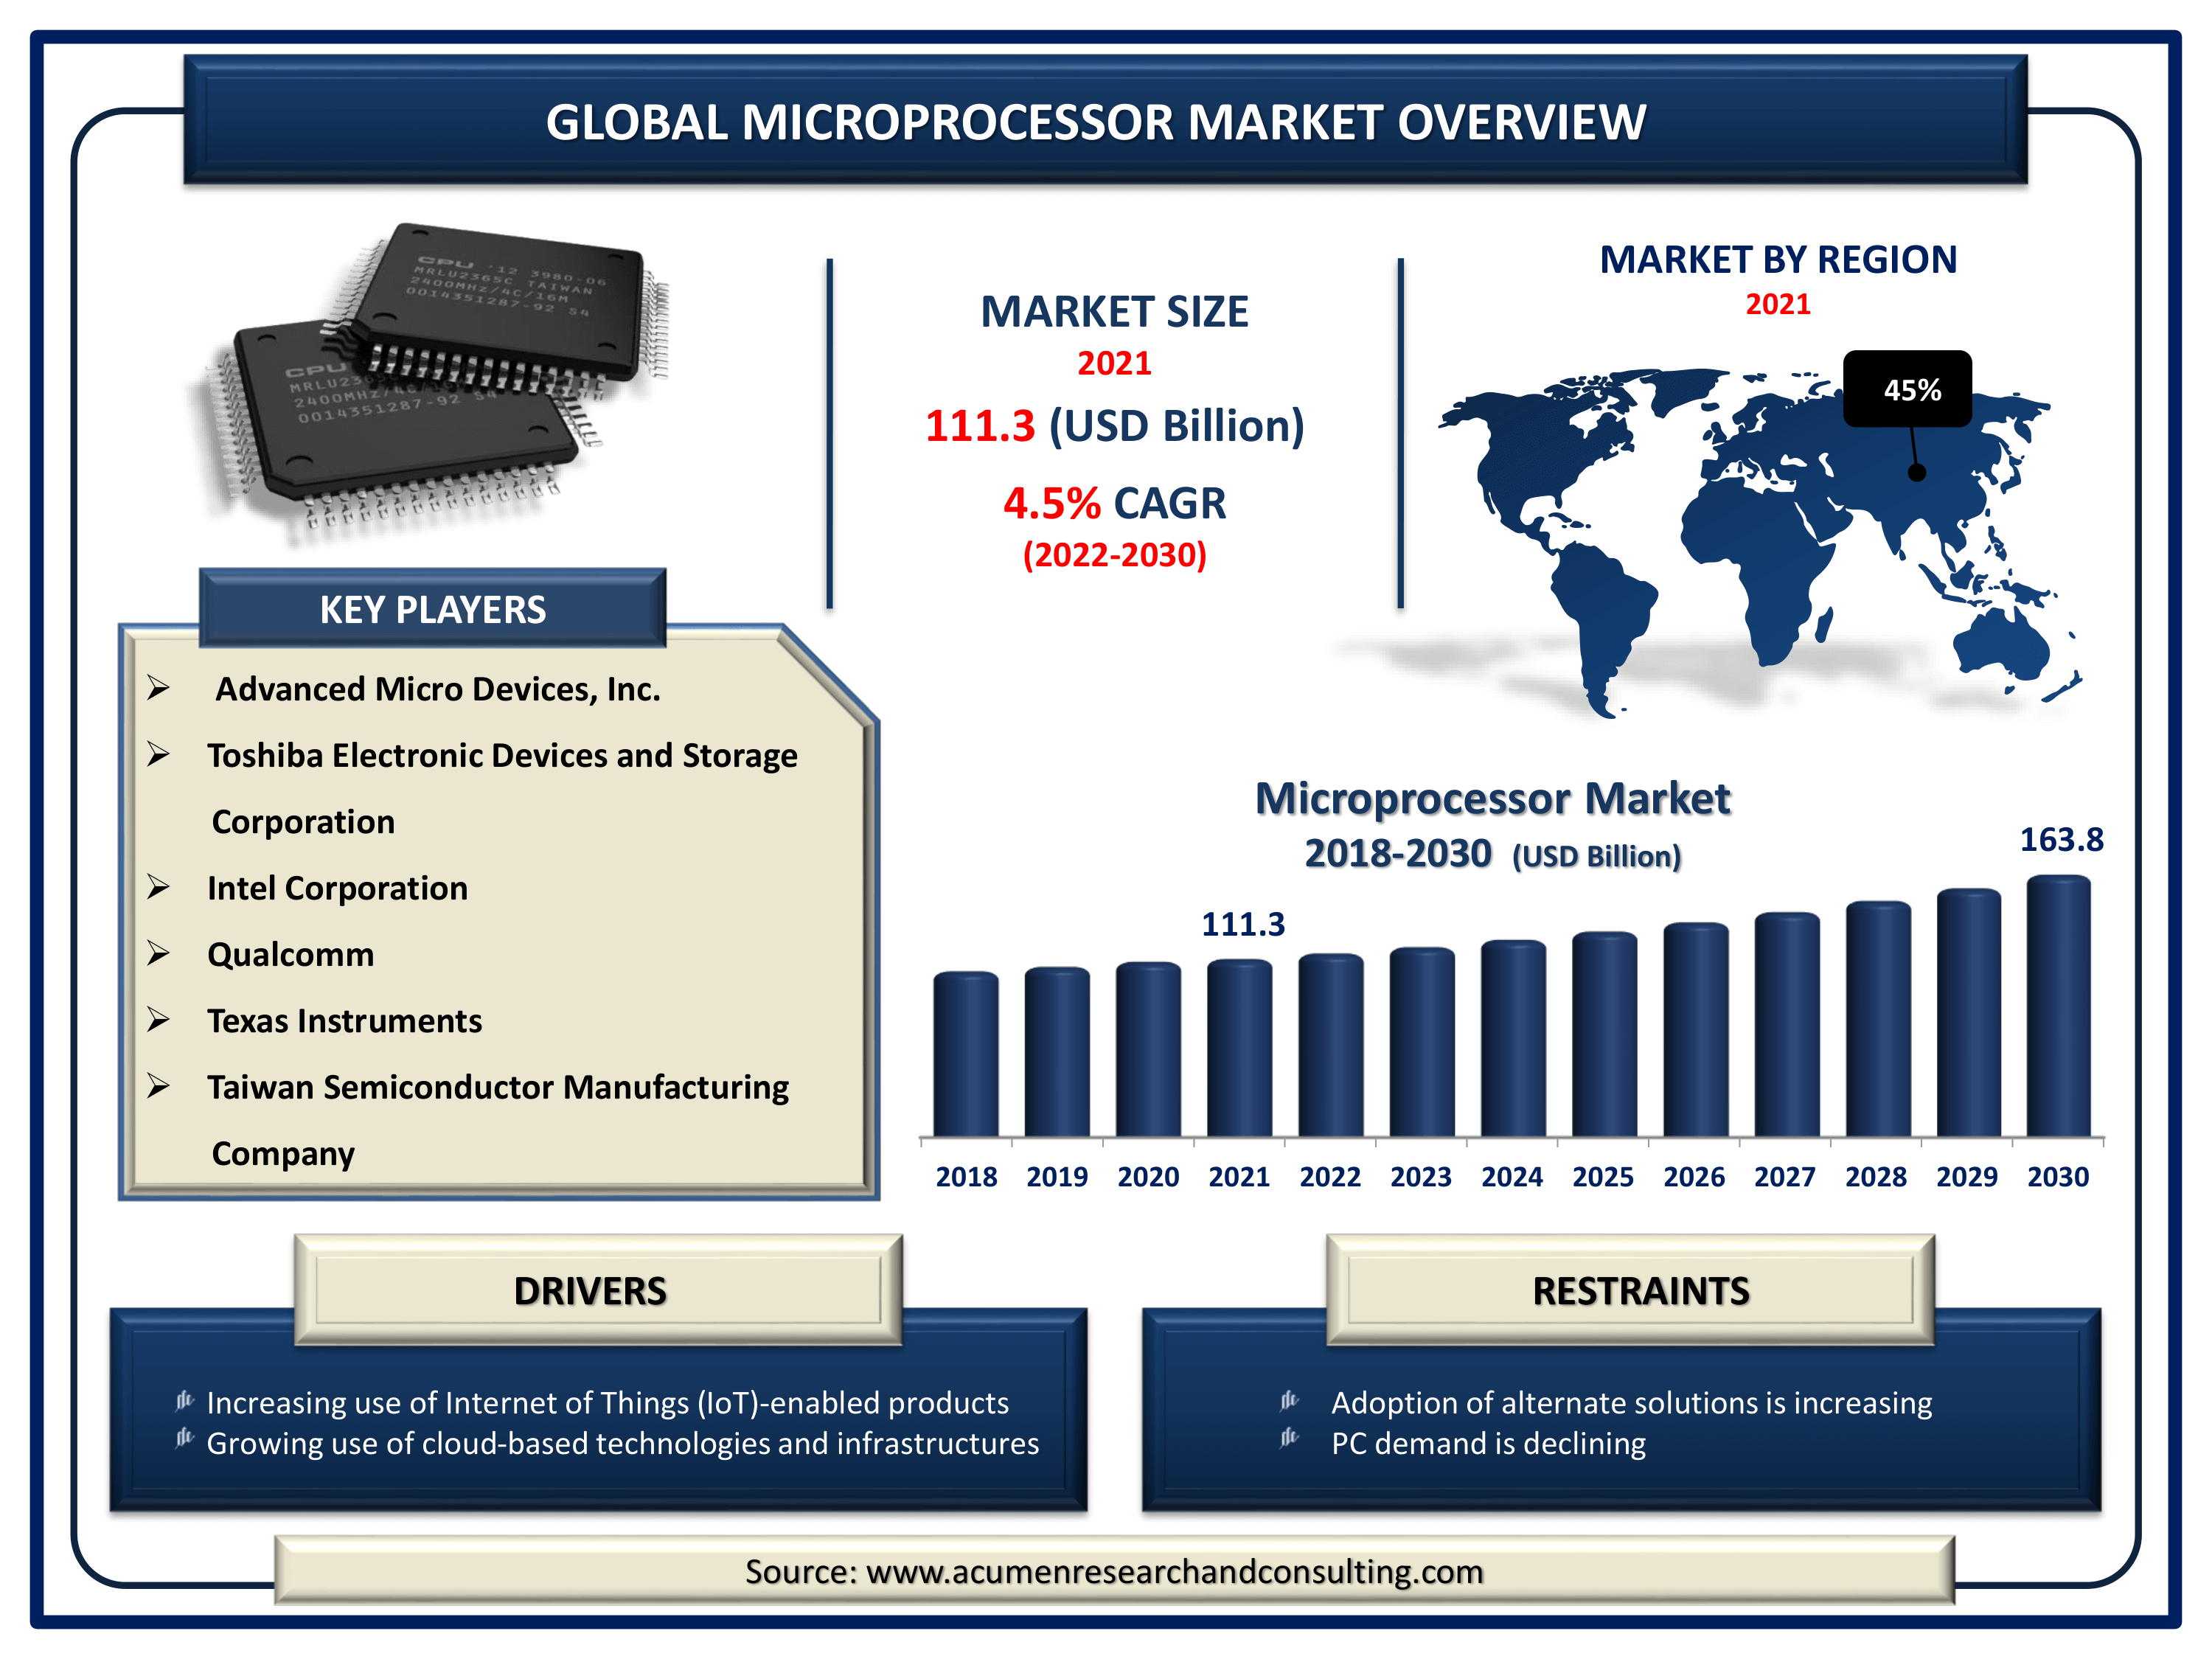 Global microprocessor market revenue is estimated to expand by USD 163.8 billion by 2030, with a 4.5% CAGR from 2022 to 2030.